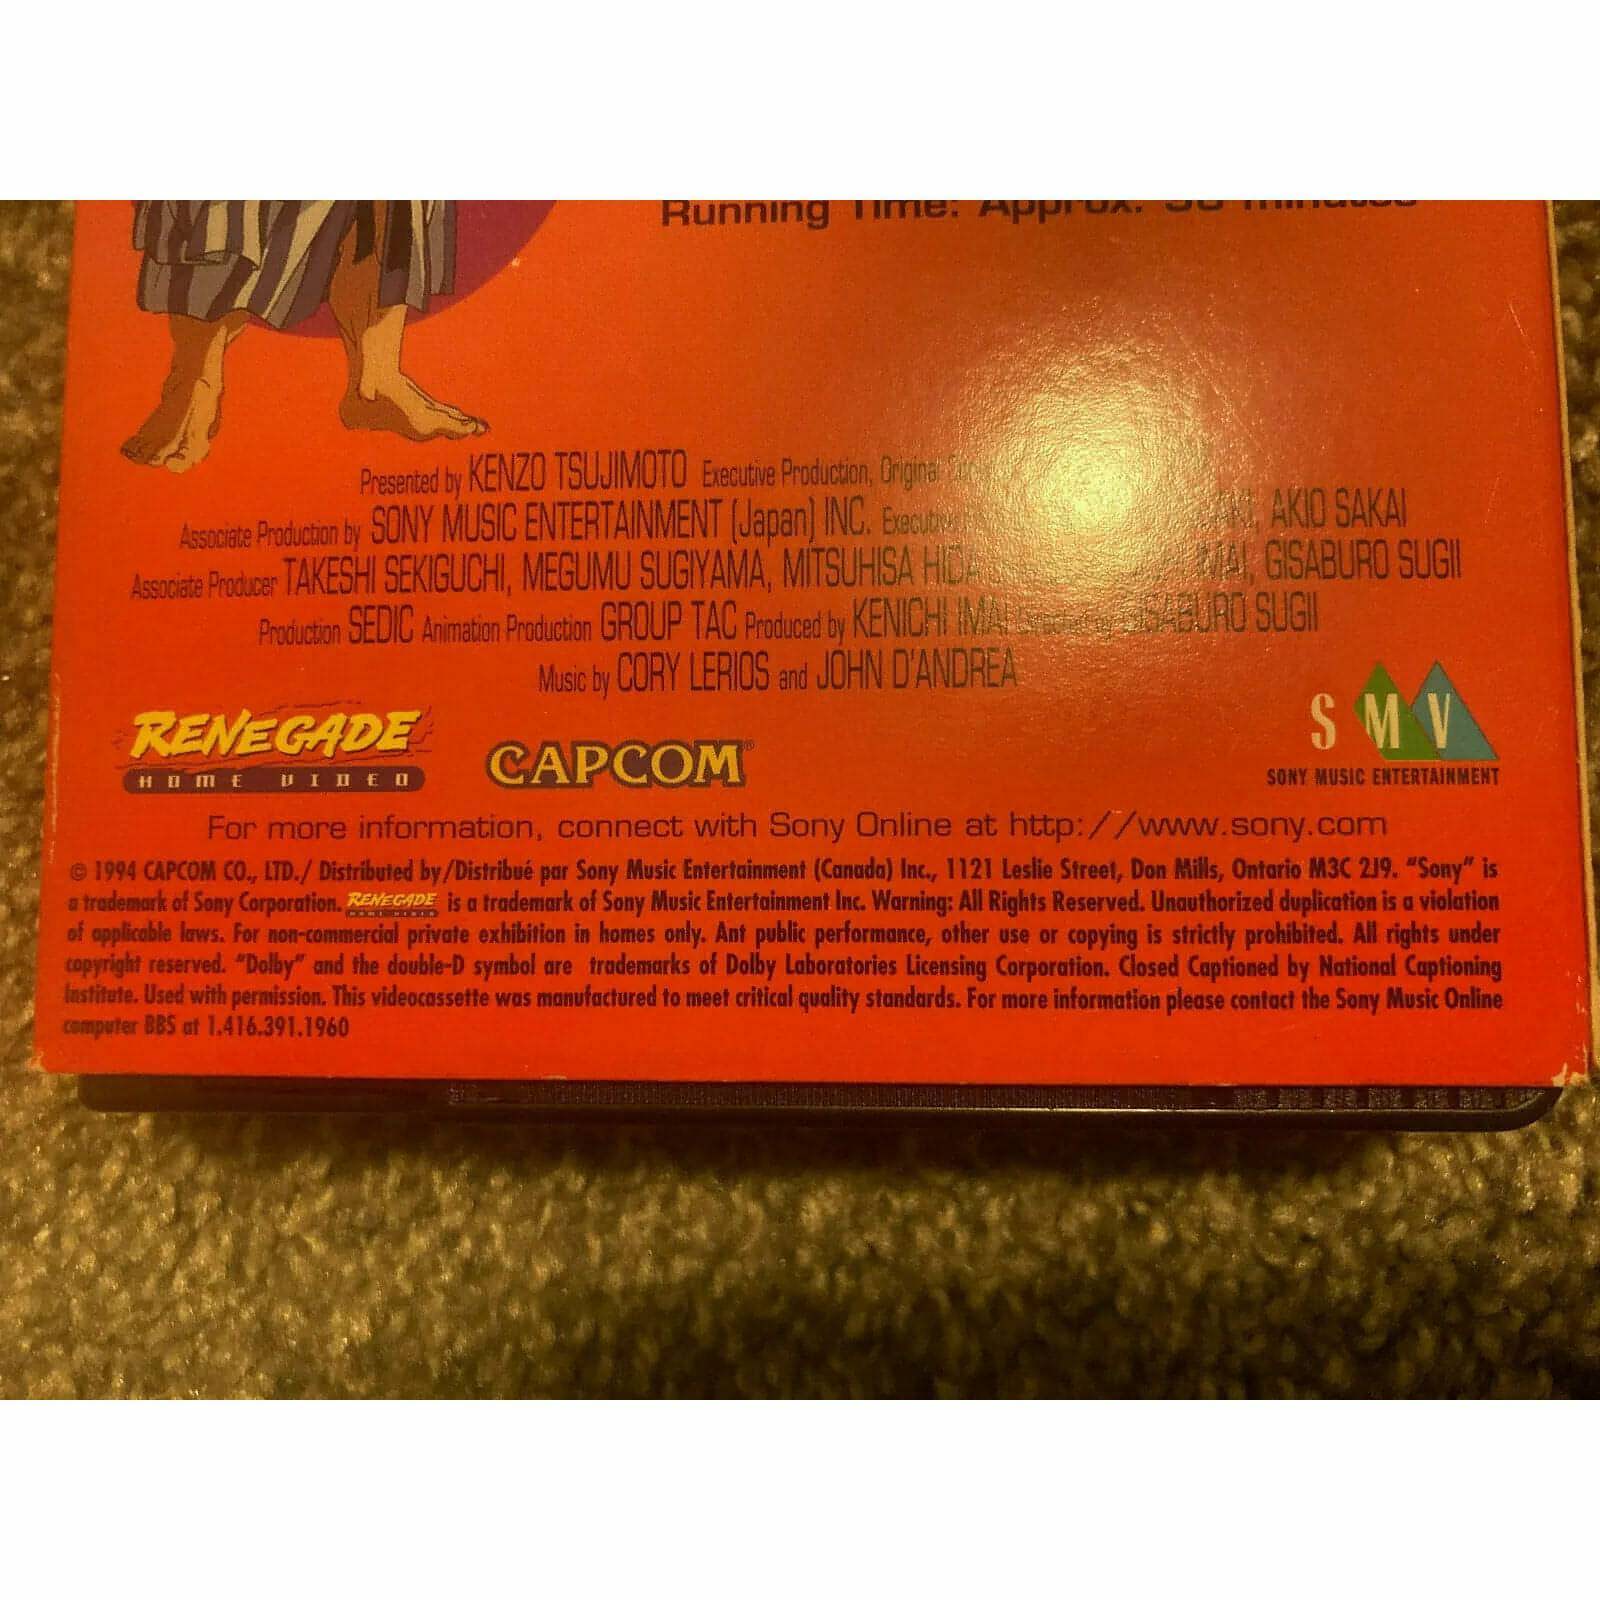 Street Fighter II: Animated Movie (VHS, 1996) BooksCardsNBikes